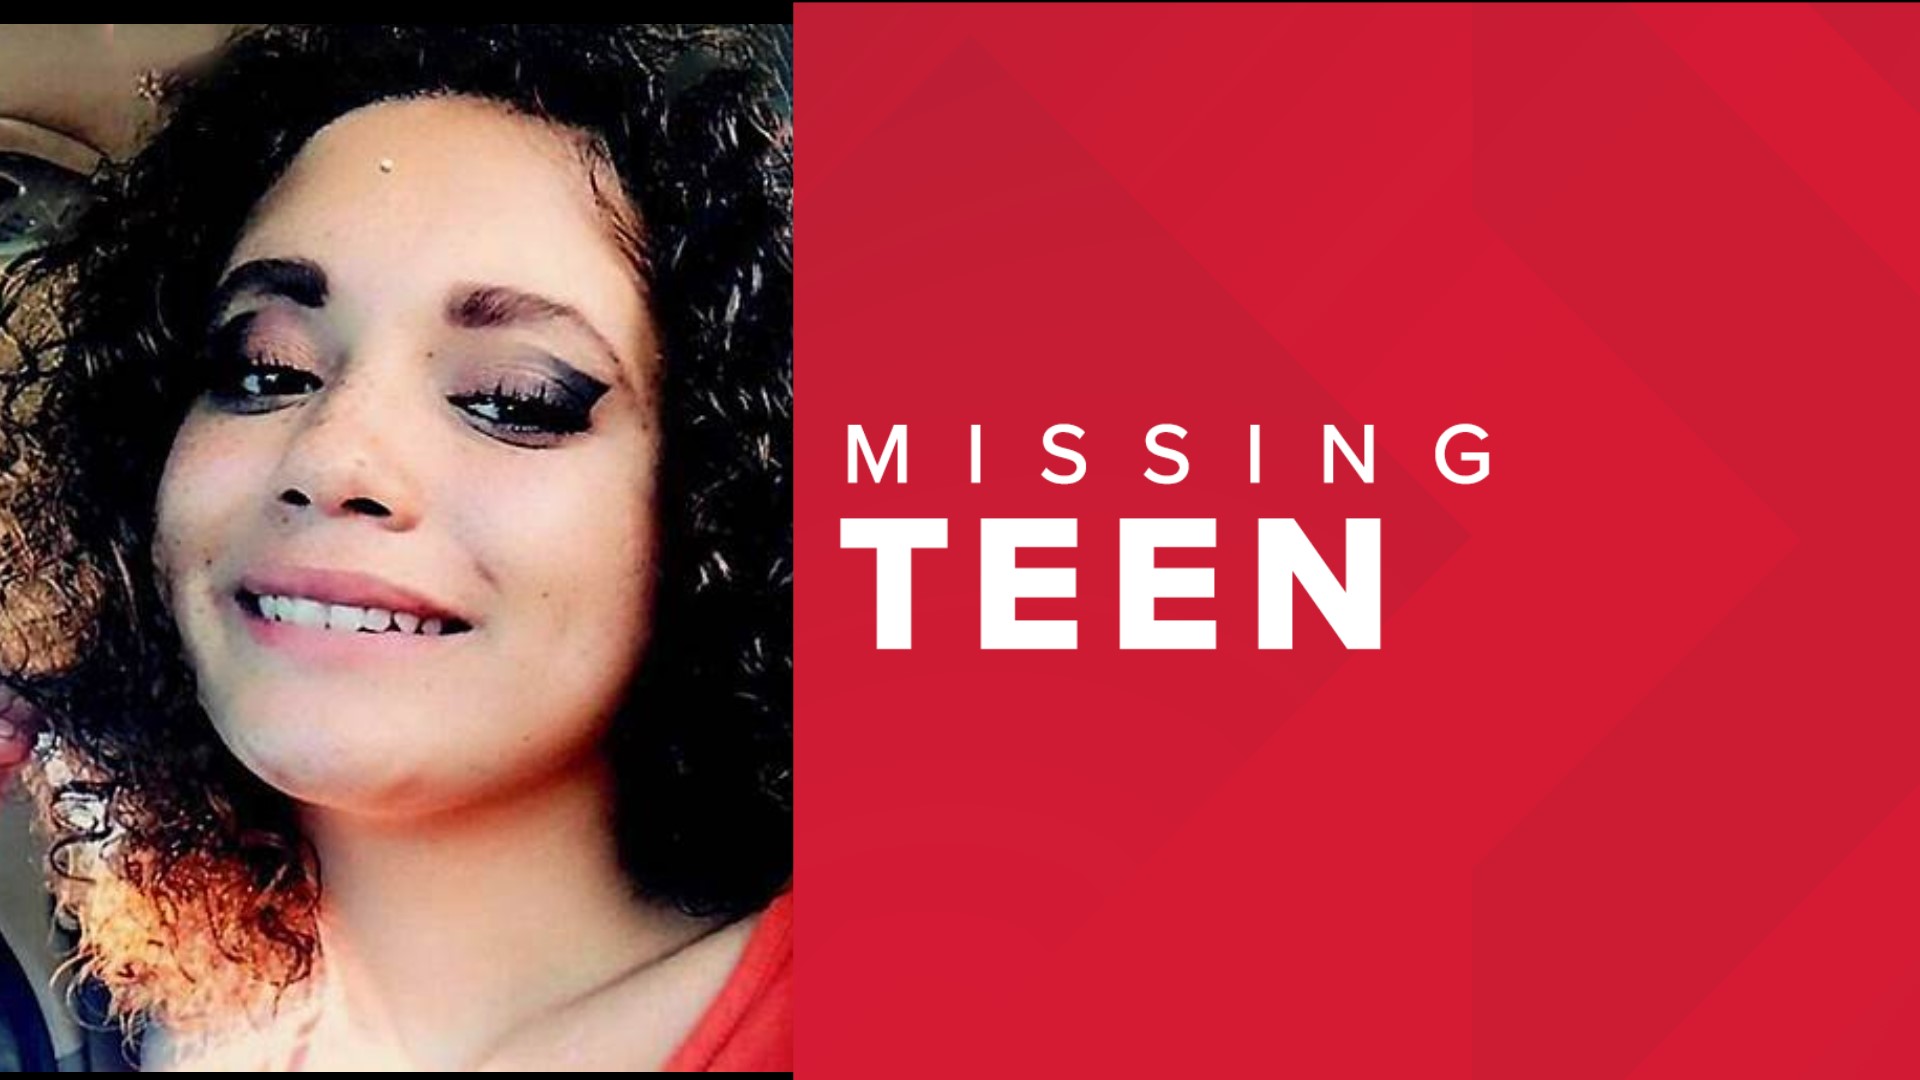 The 14-year-old was last seen on Nov. 4.